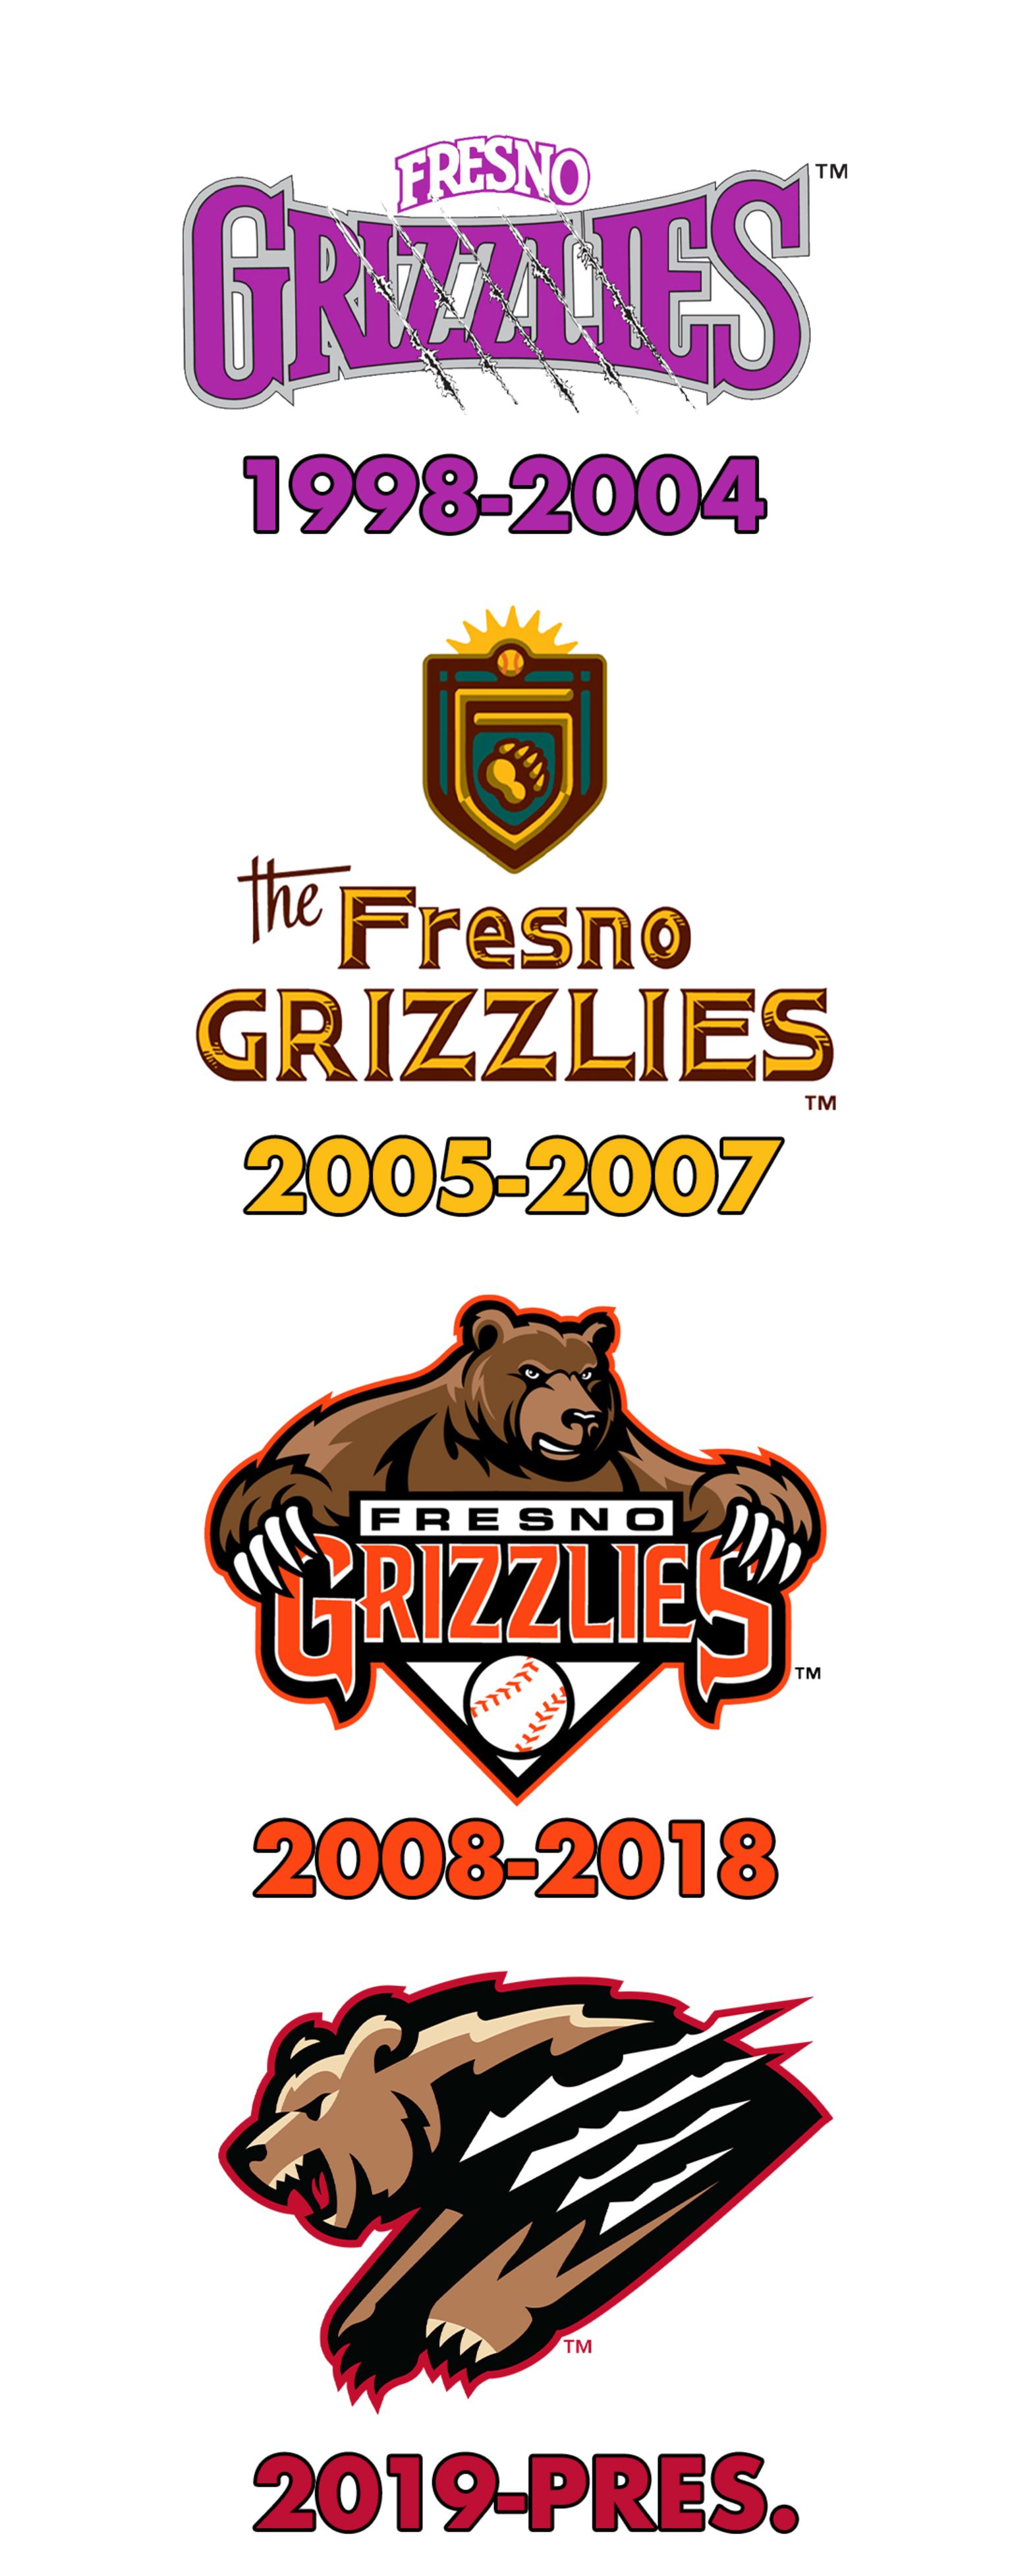 About The Fresno Grizzlies | Grizzlies